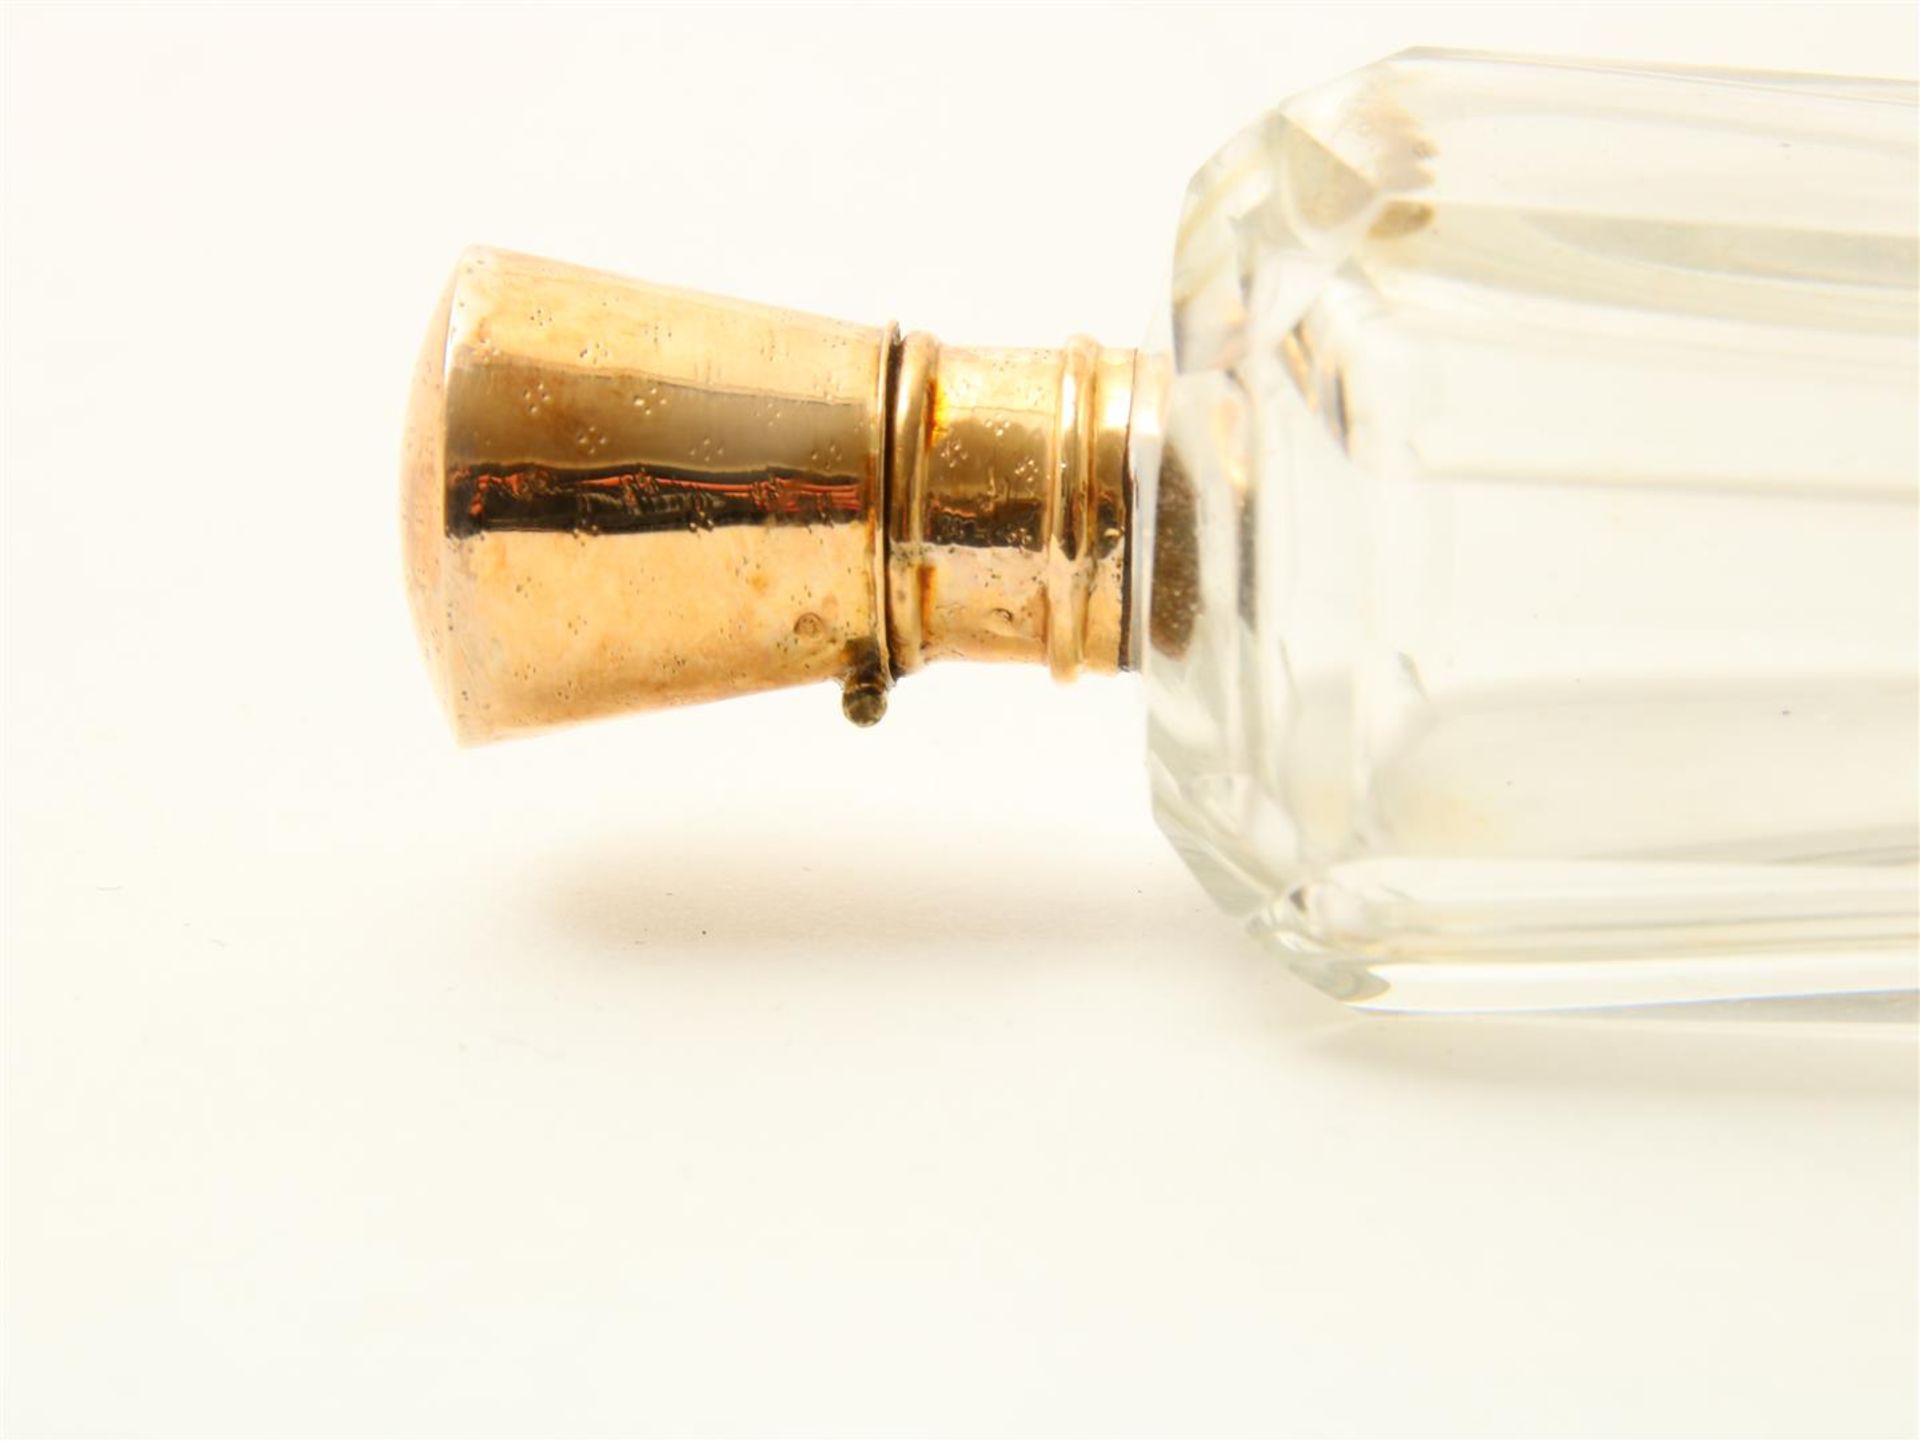 Crystal perfume bottle with gold cap in case - Image 2 of 2